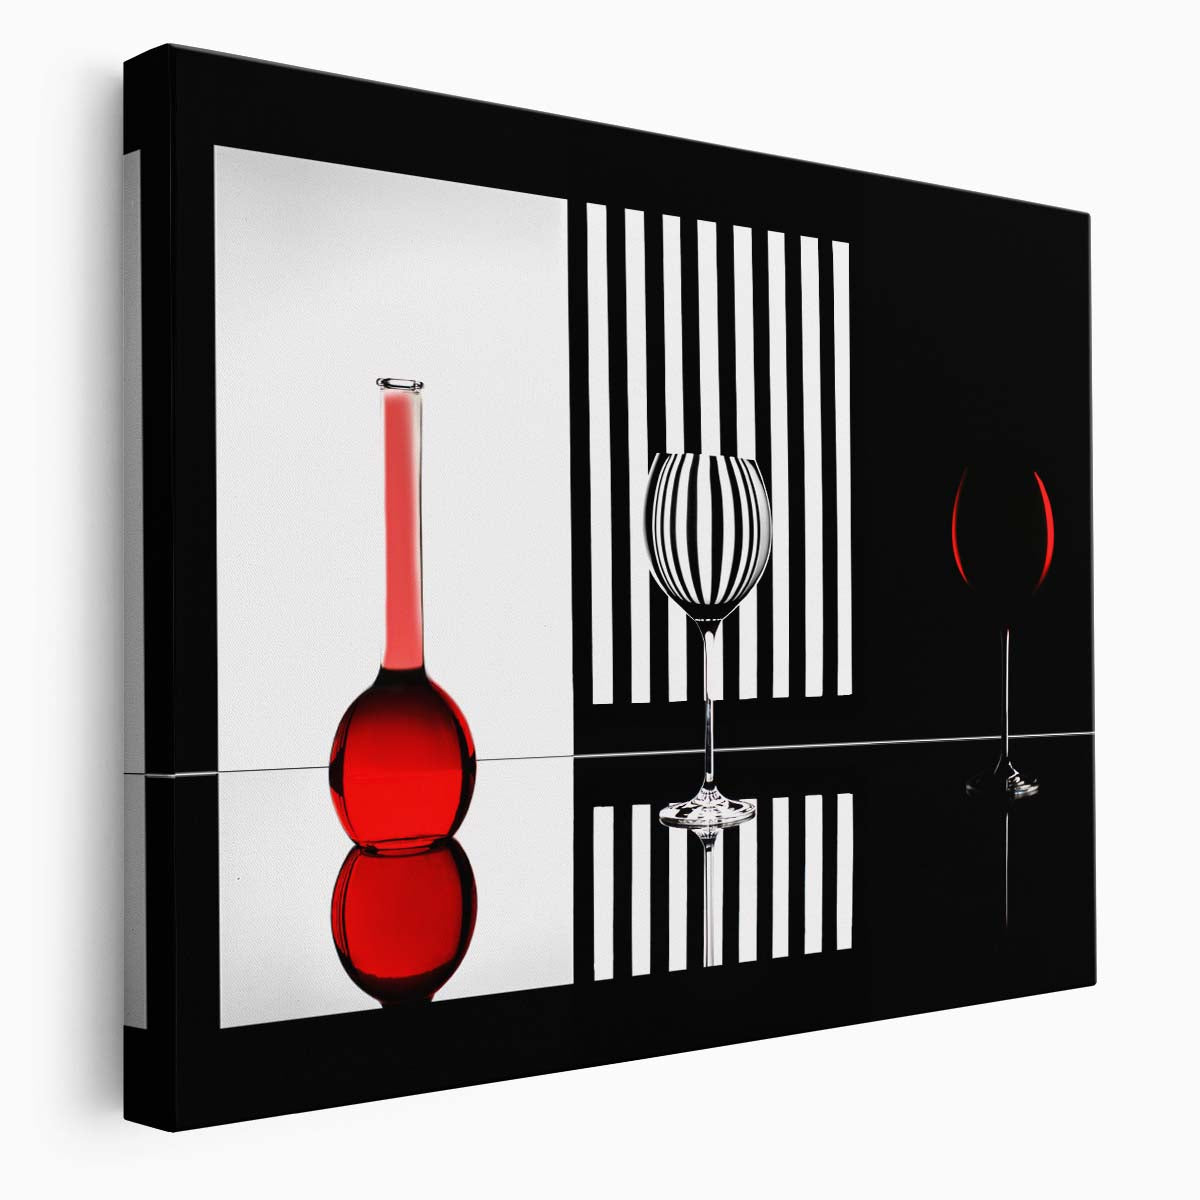 Abstract Zebra Stripe Wine Glass Reflection Wall Art by Luxuriance Designs. Made in USA.